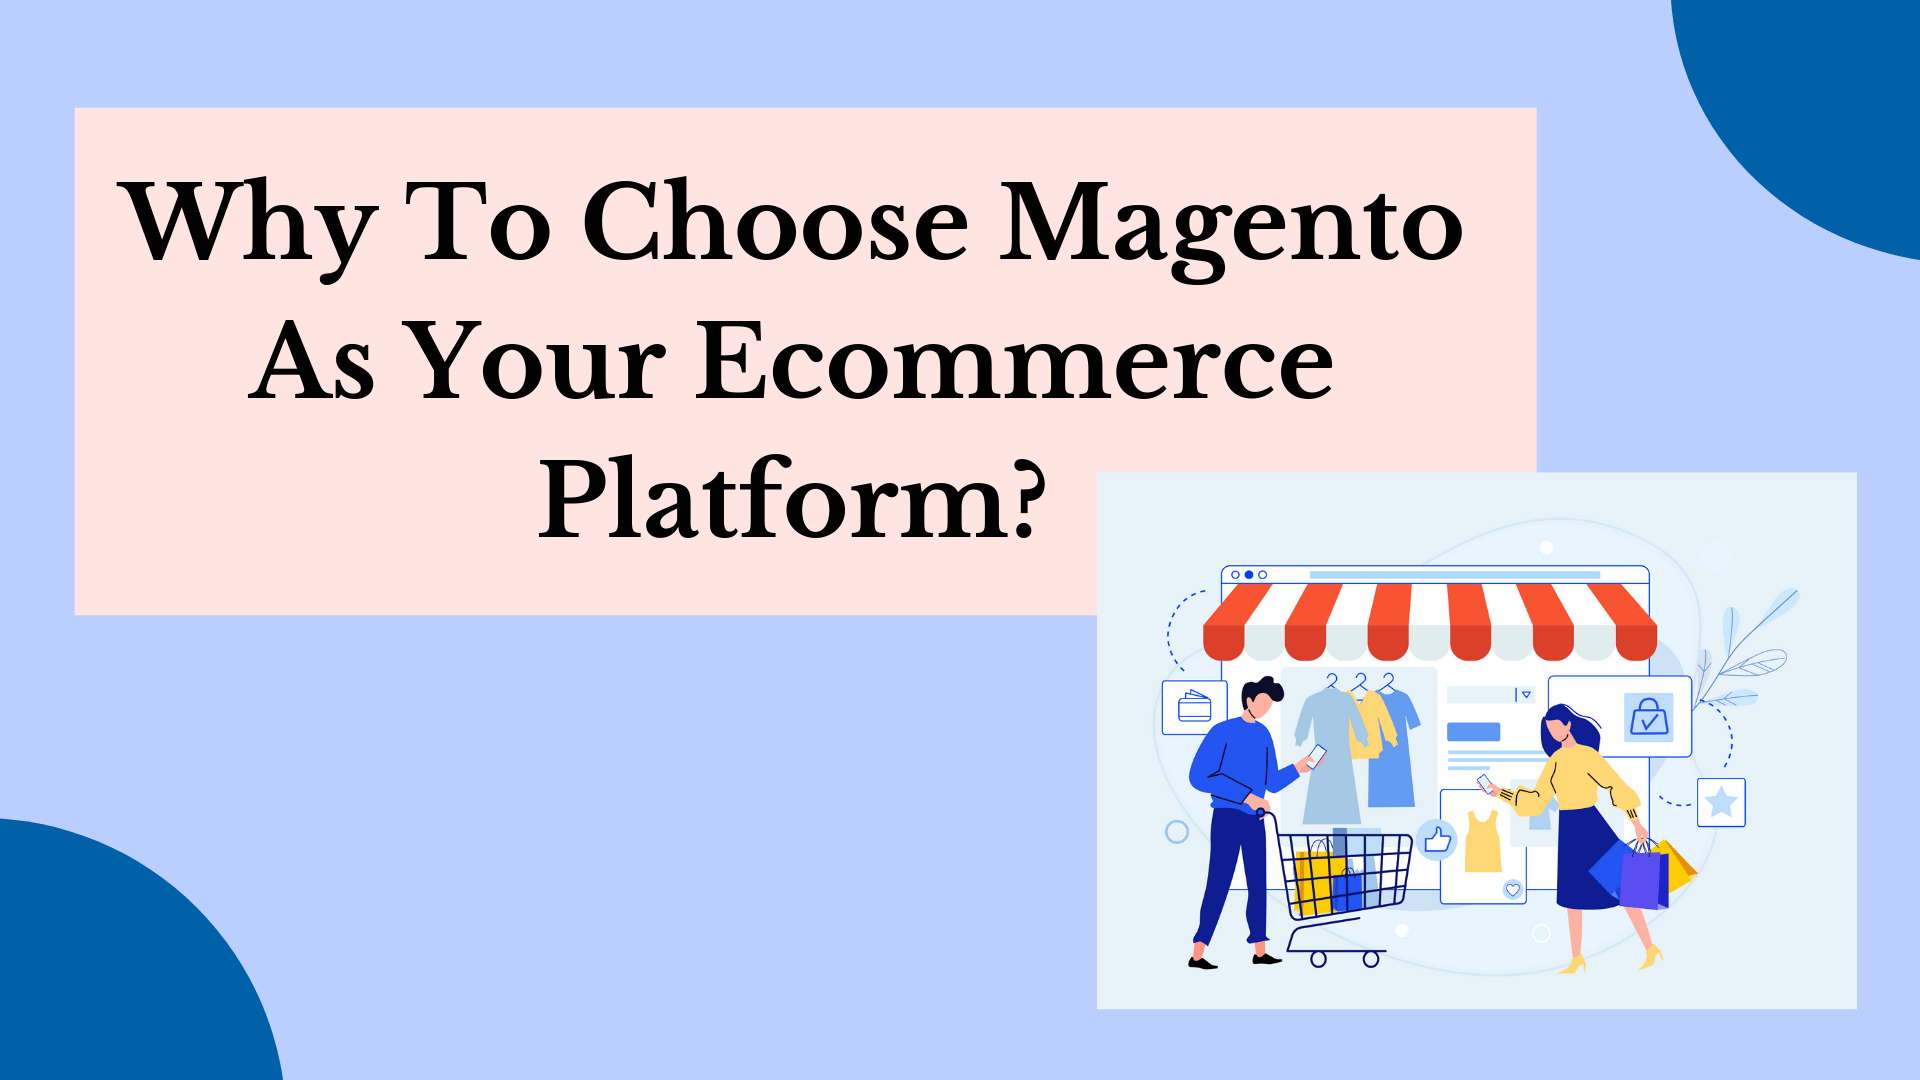 Magento for eCommerce: Why To Choose Magento As Your Ecommerce Platform?